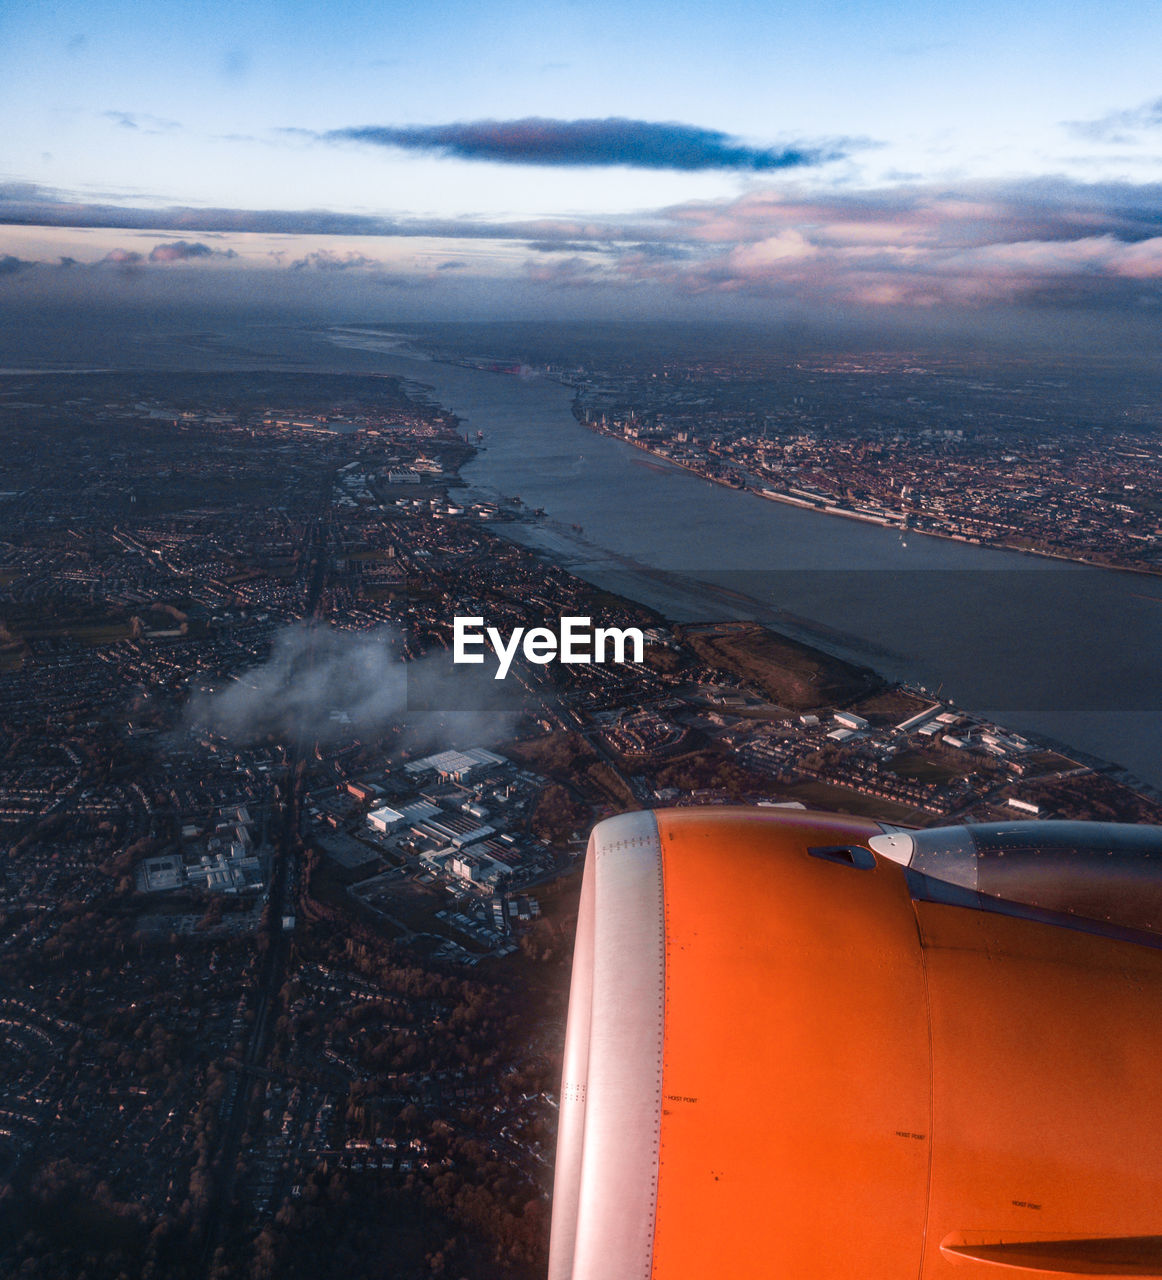 Aerial view of cityscape and jet engine